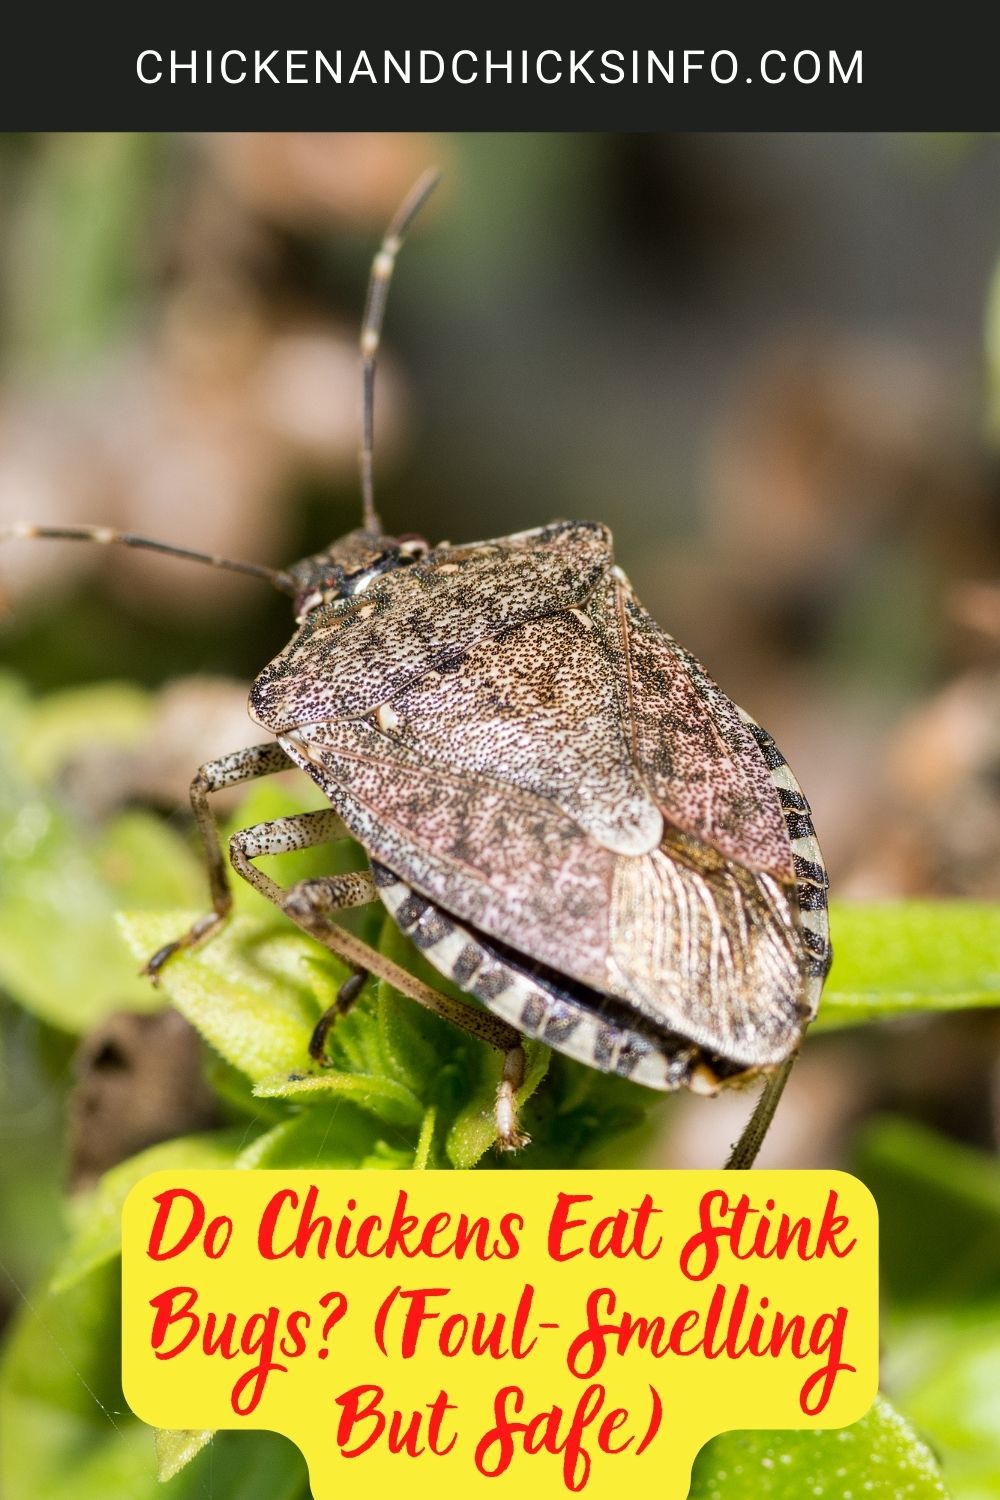 Do Chickens Eat Stink Bugs? (Foul-Smelling But Safe) poster.
